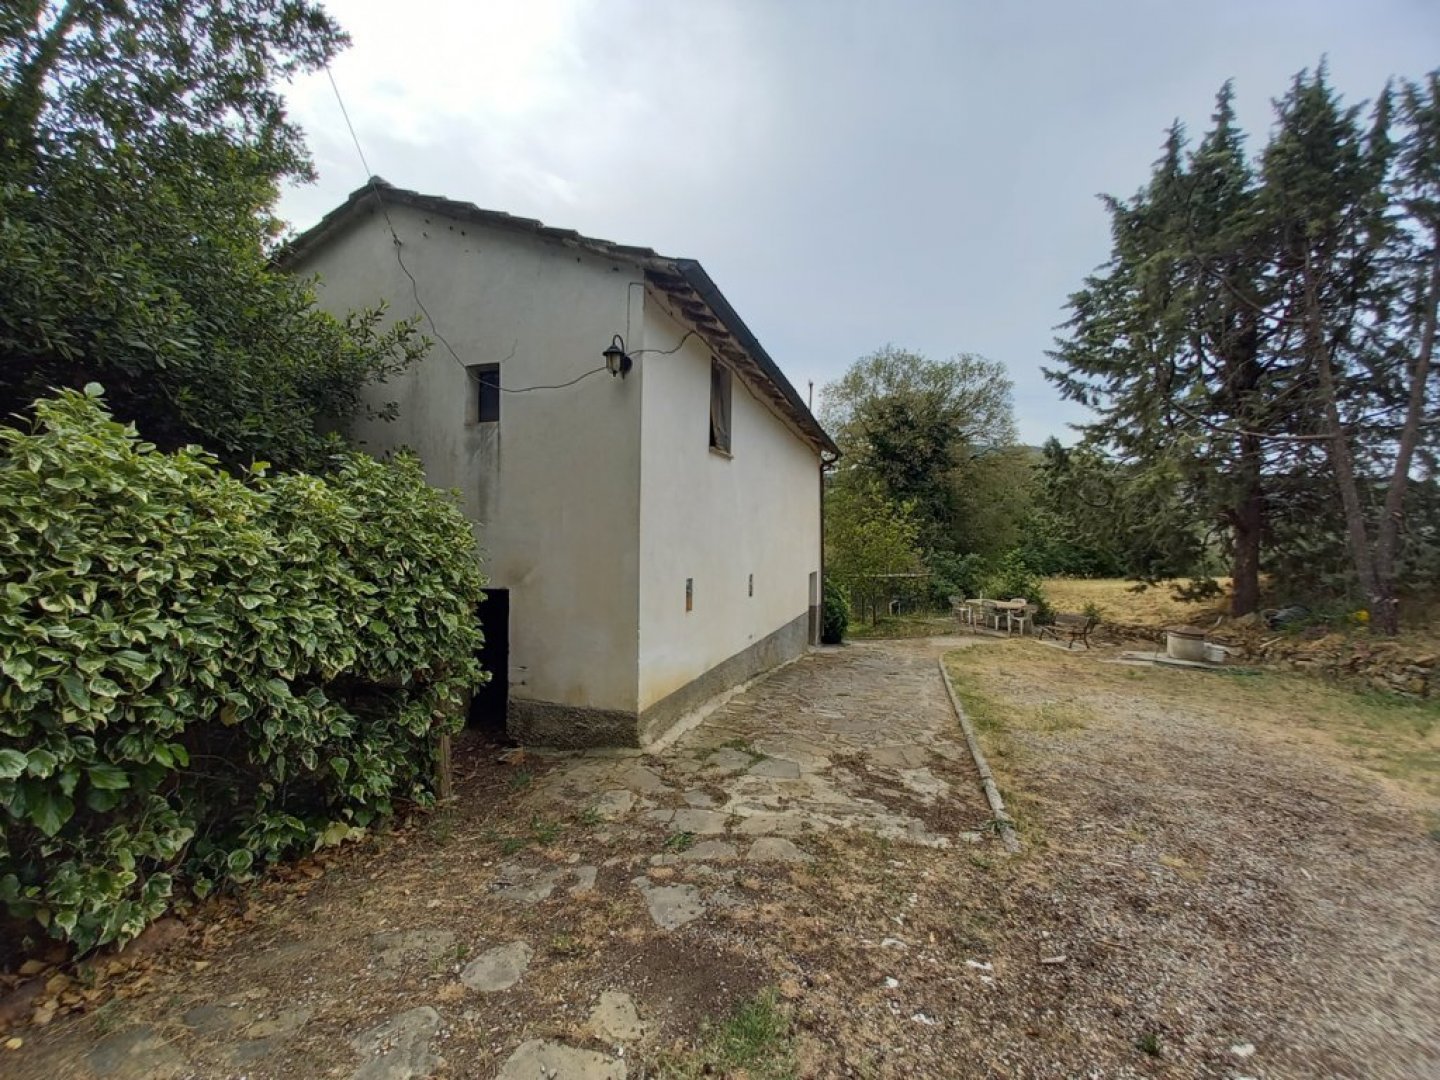 Detached house in the open countrysideg_20220617081747 ium36909-g_20220617081747.